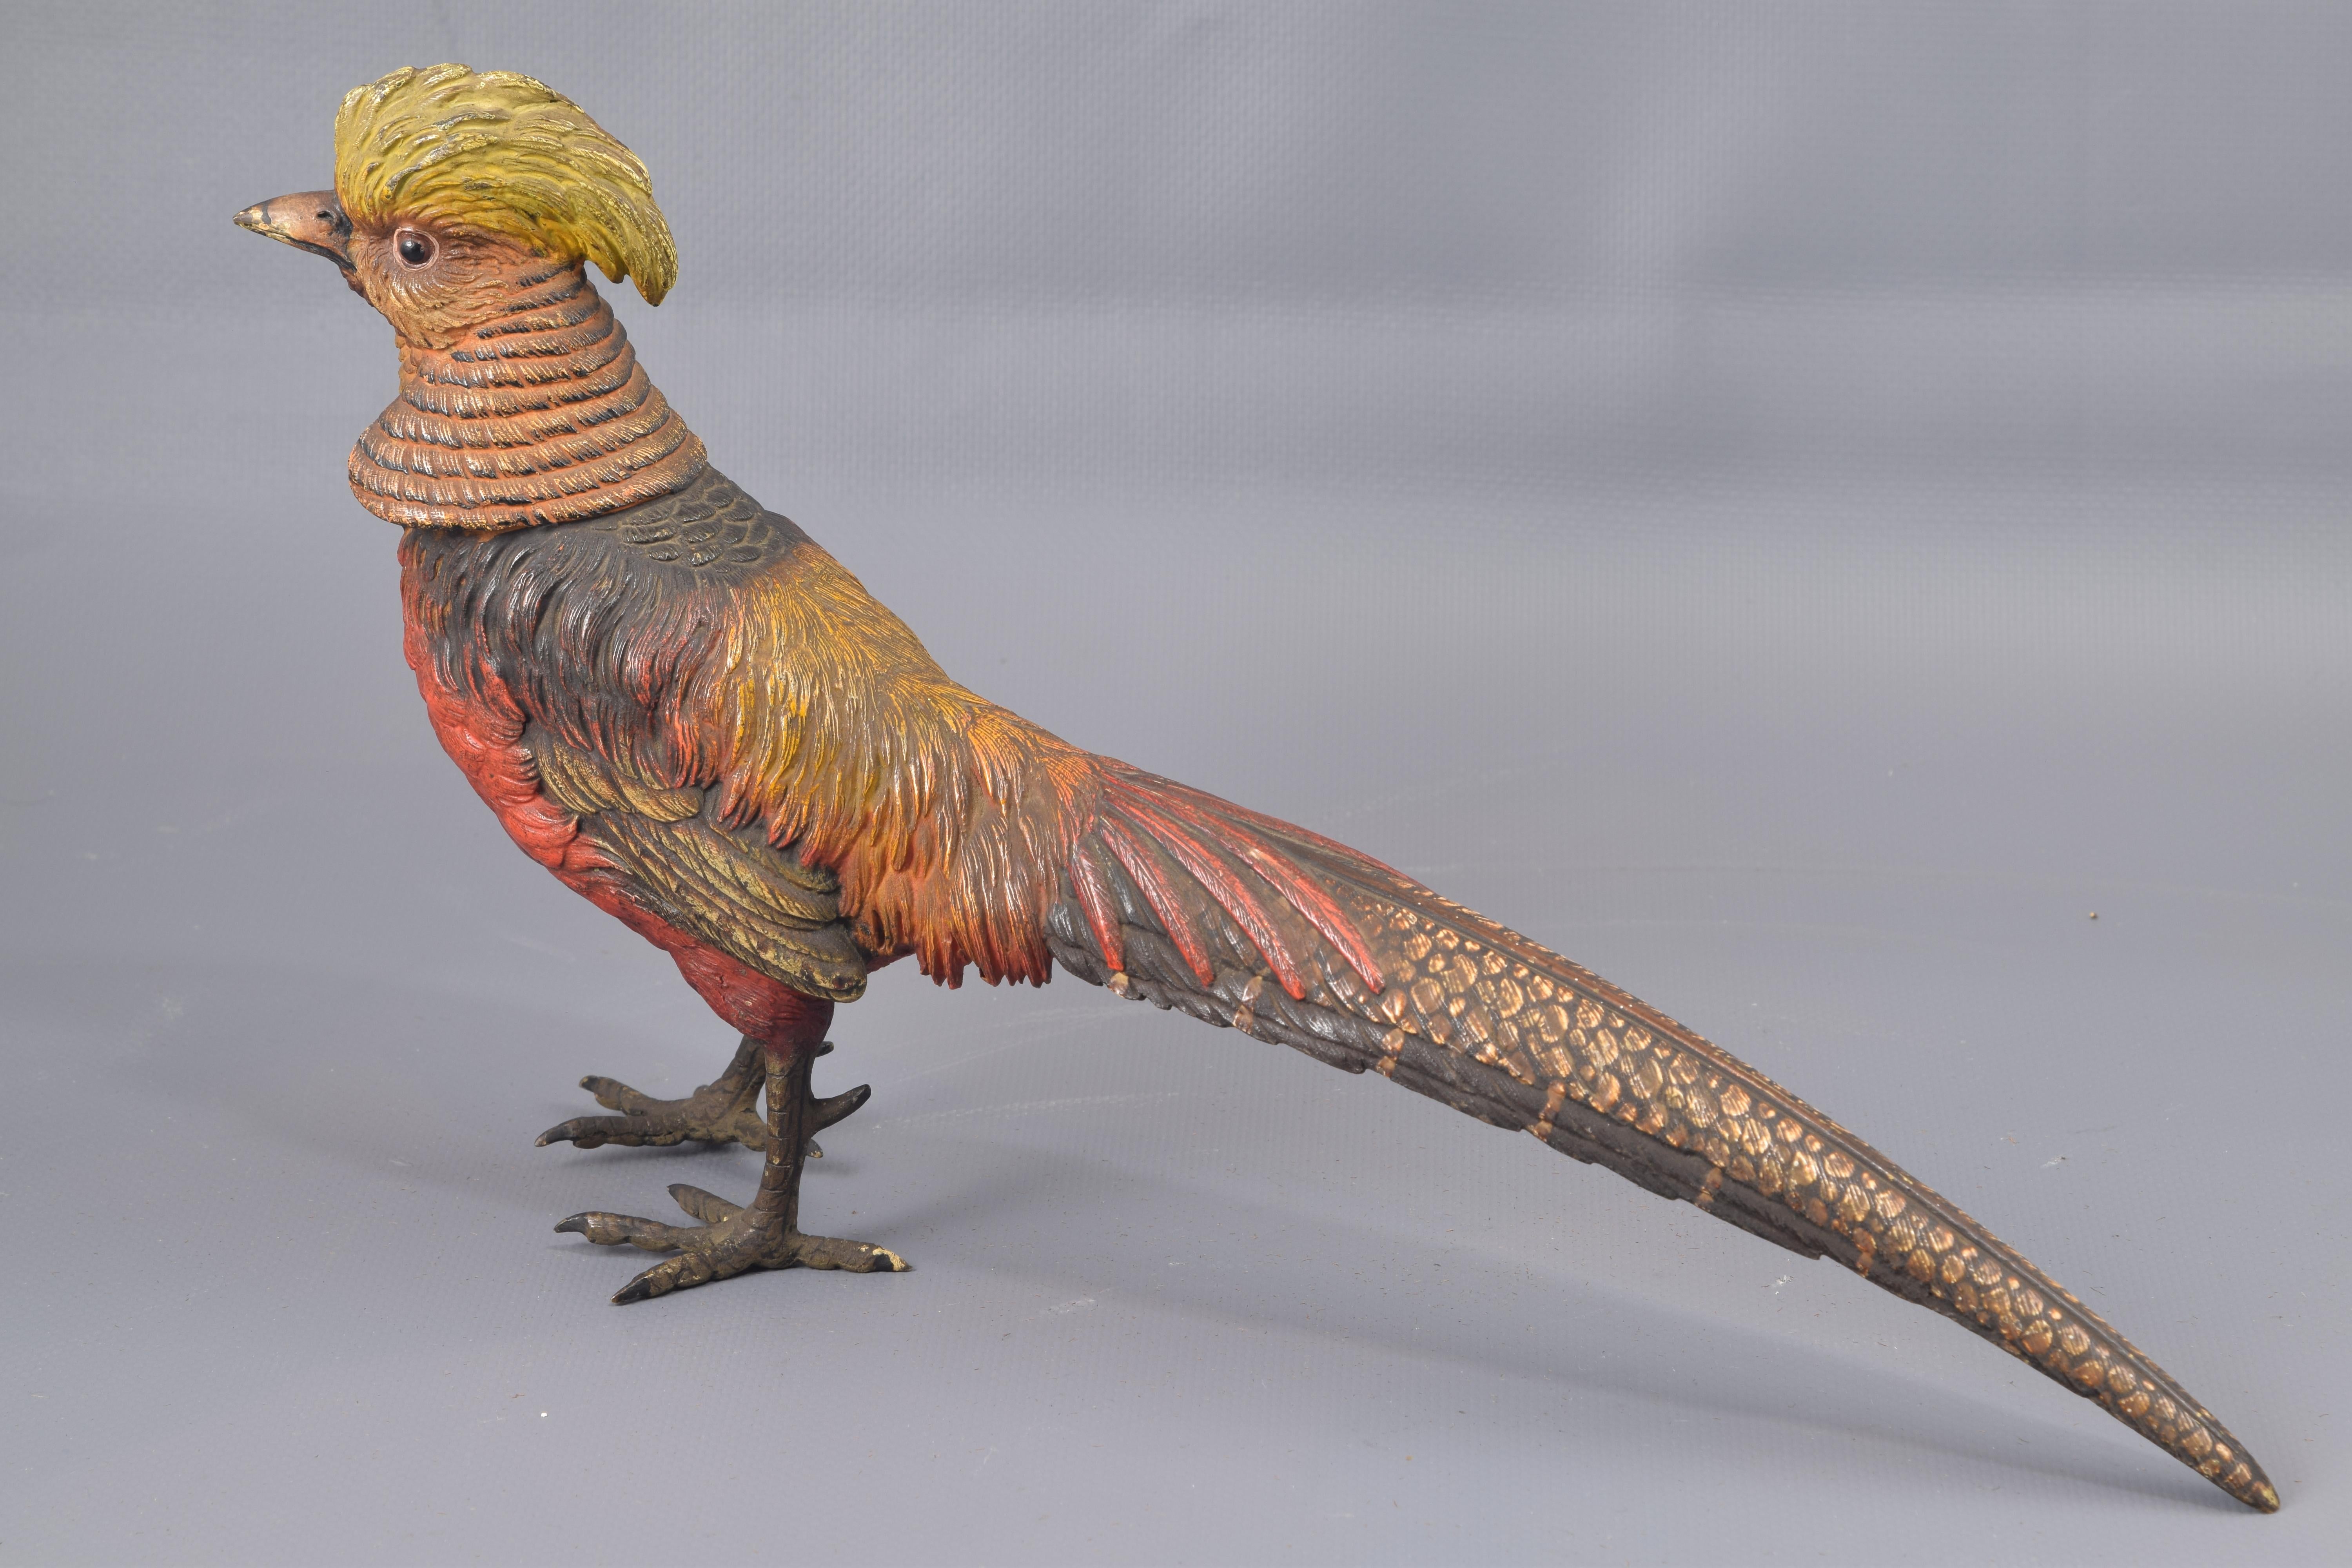 Golden pheasant polychrome bronze Vienna, 19th century
Polychrome bronze figure showing a golden male pheasant perched. A bird native to Asia, it was already known in the West in the 18th century (it appears in the tenth edition of the Systema